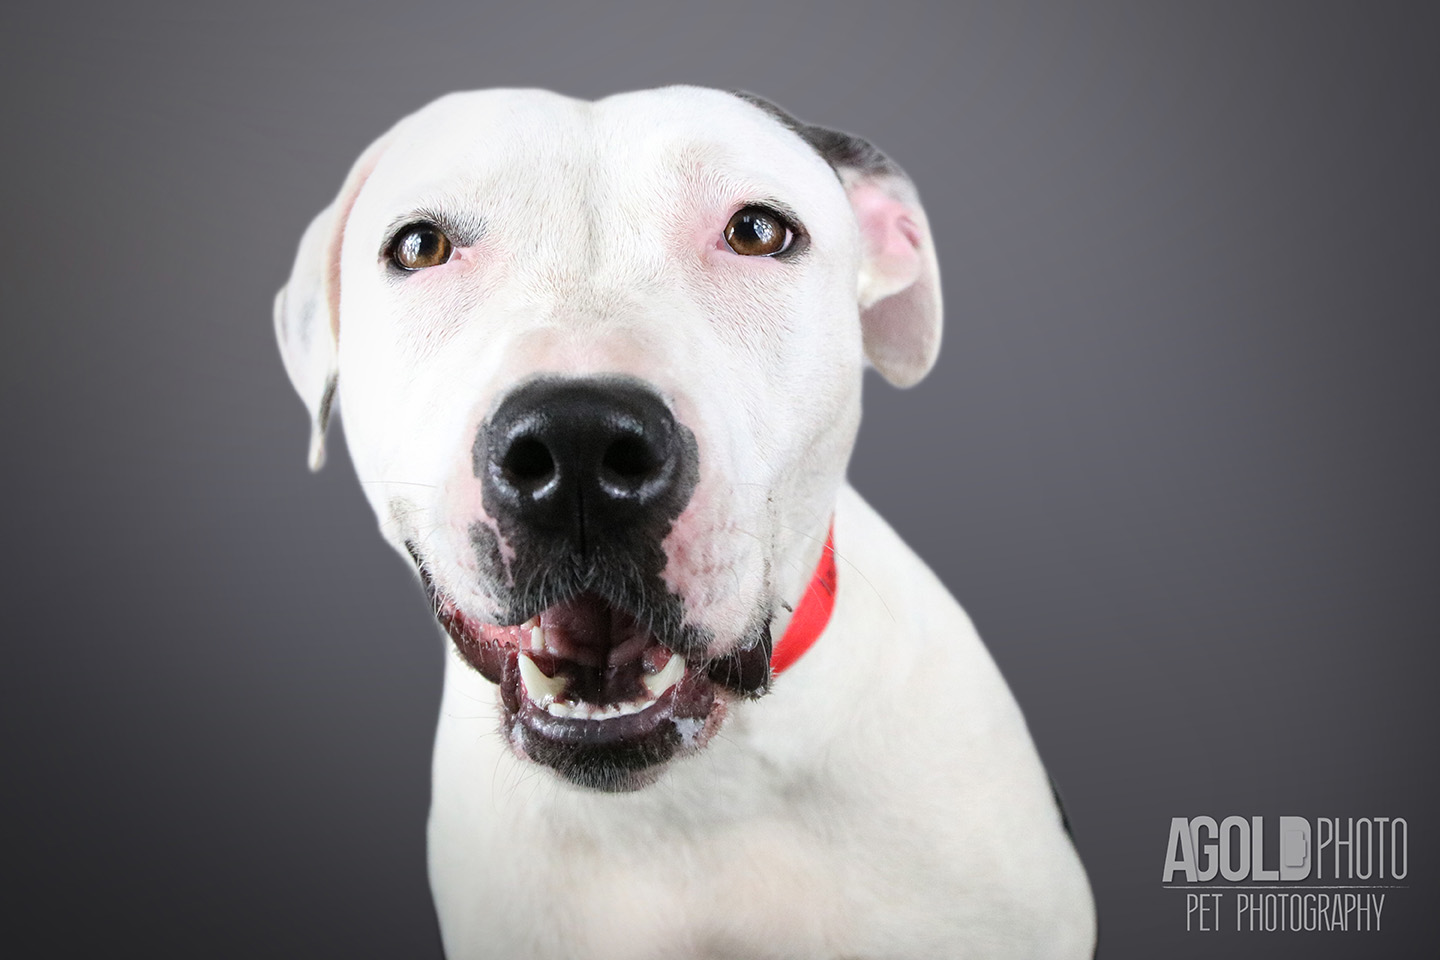 ruthie_agoldphoto-tampa-pet-photography__agoldphoto-tampa-pet-photography_